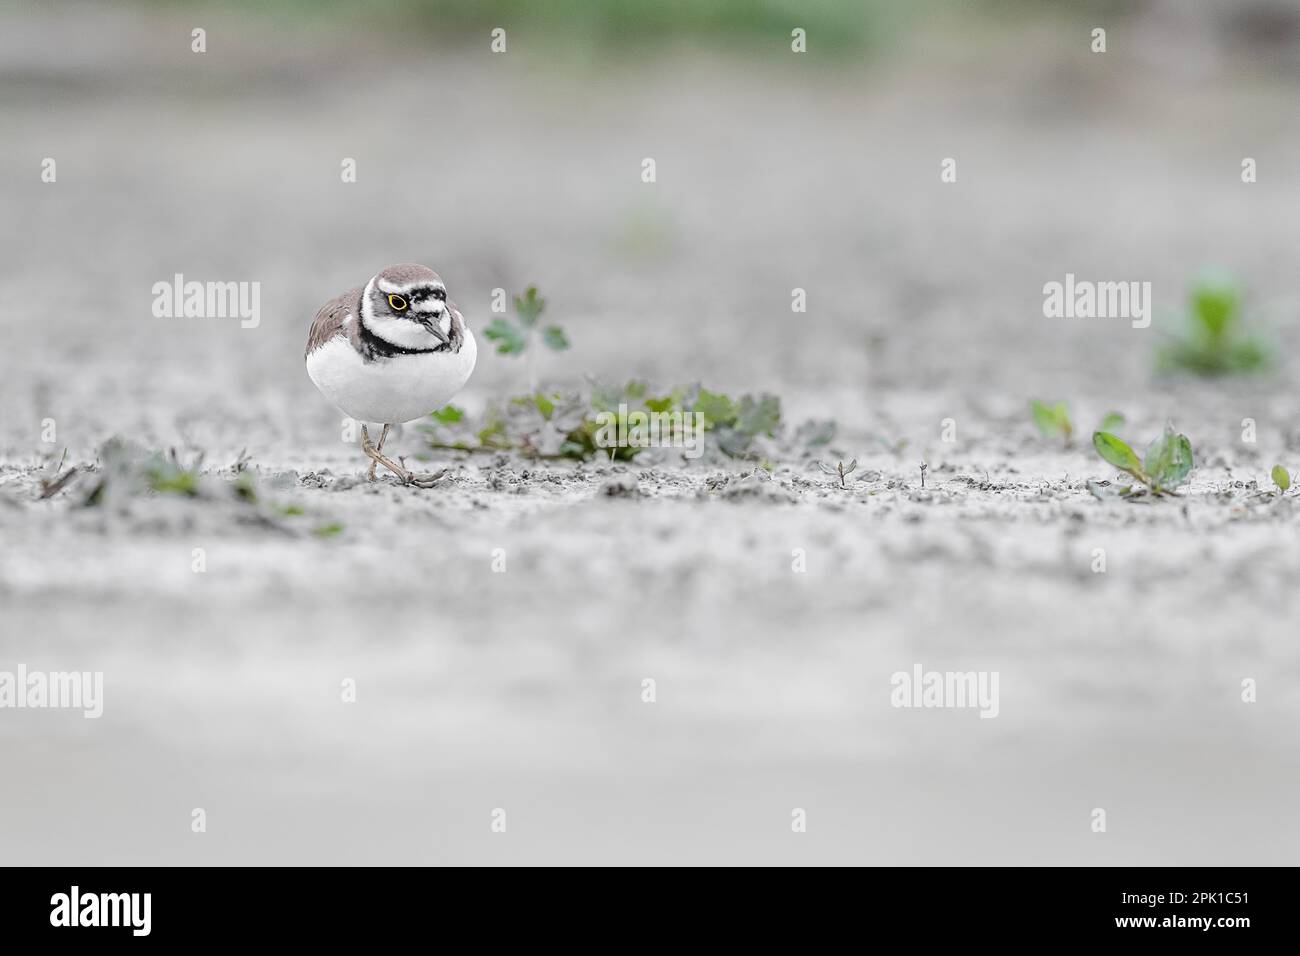 Face to face with the little ringed plover, fine art portrait (Charadrius dubius) Stock Photo